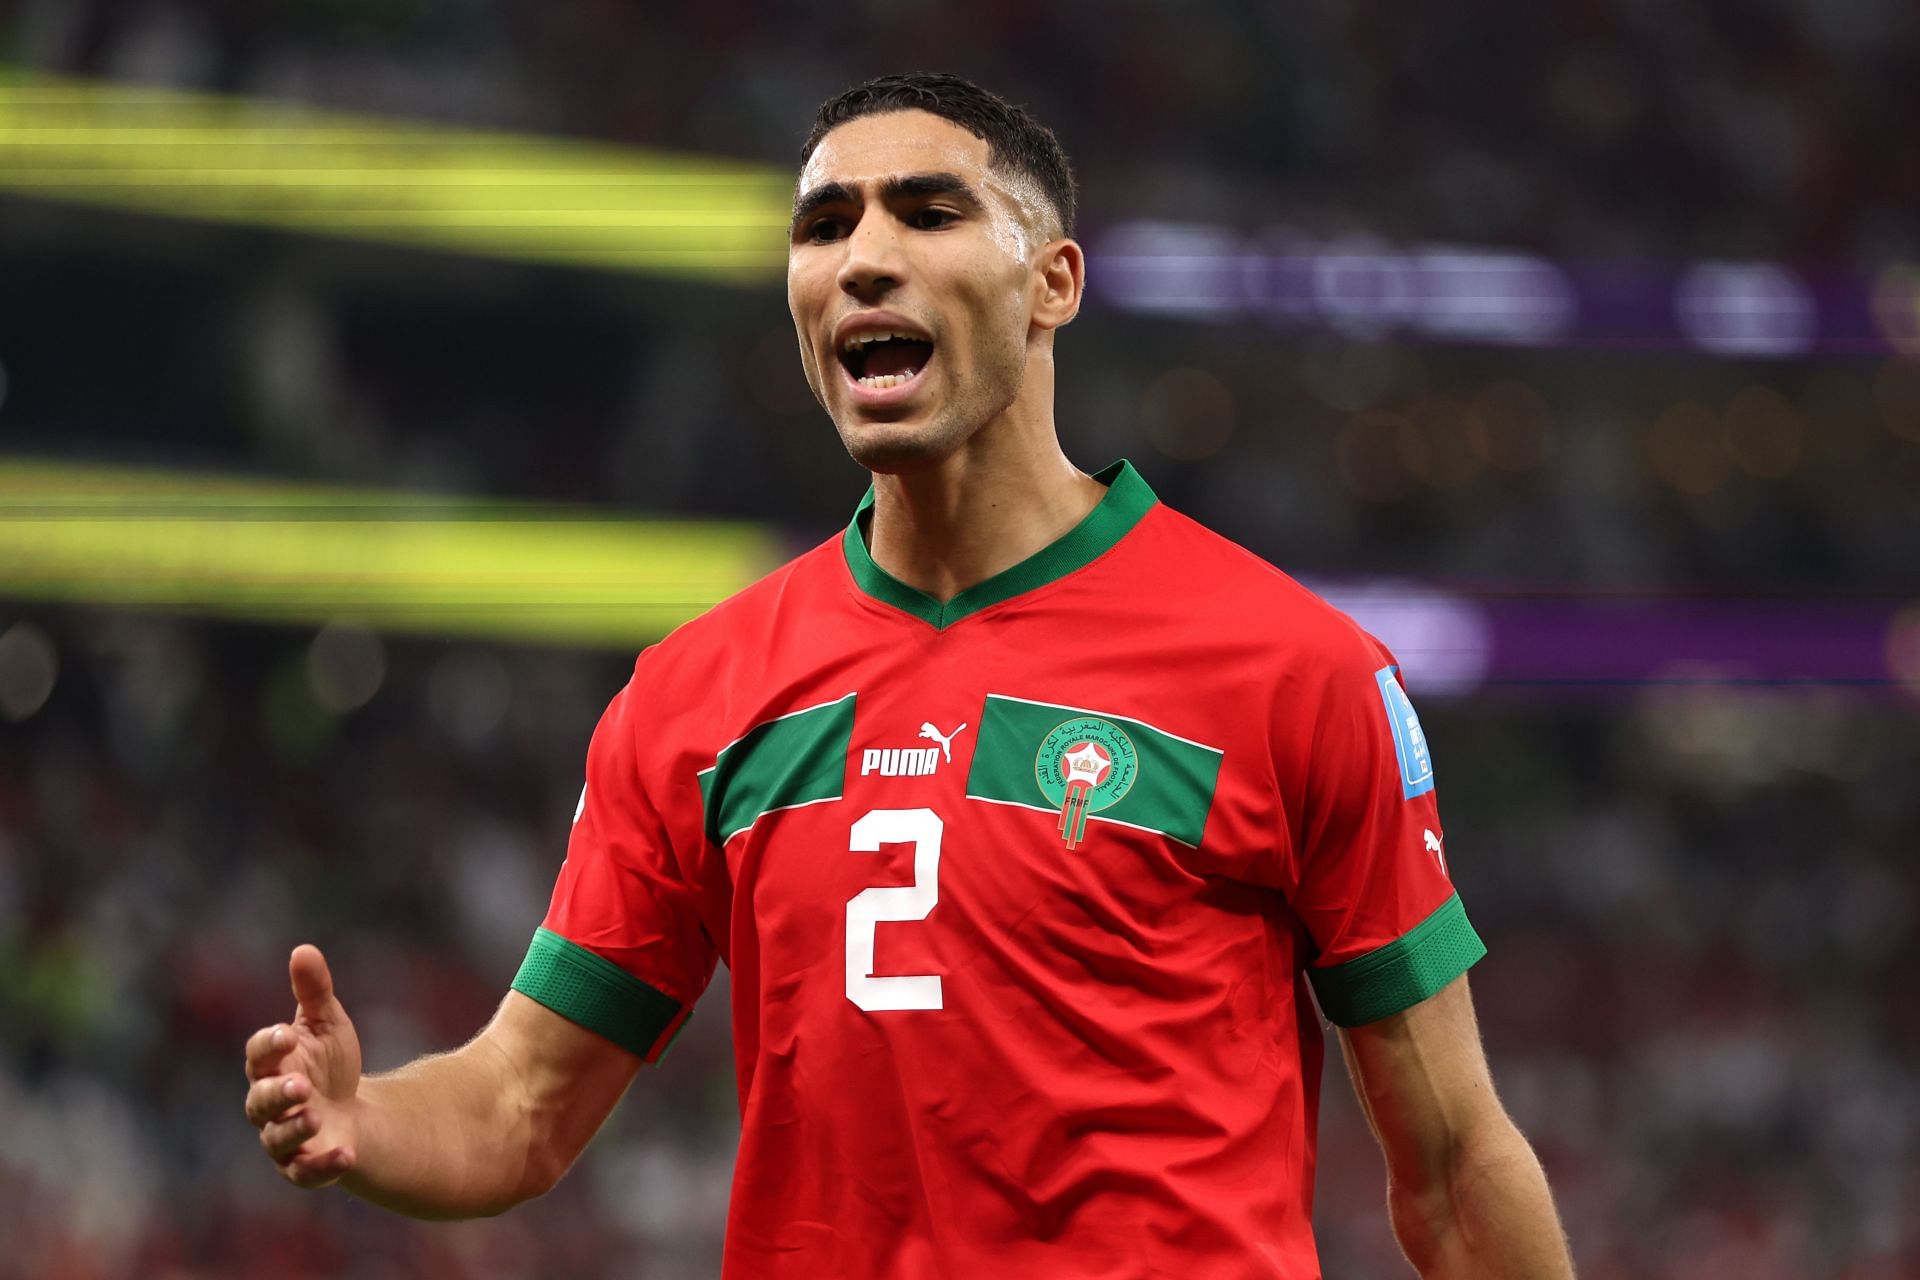 Achraf Hakimi was superb for Morocco as they made the semifinals of the 2022 FIFA World Cup